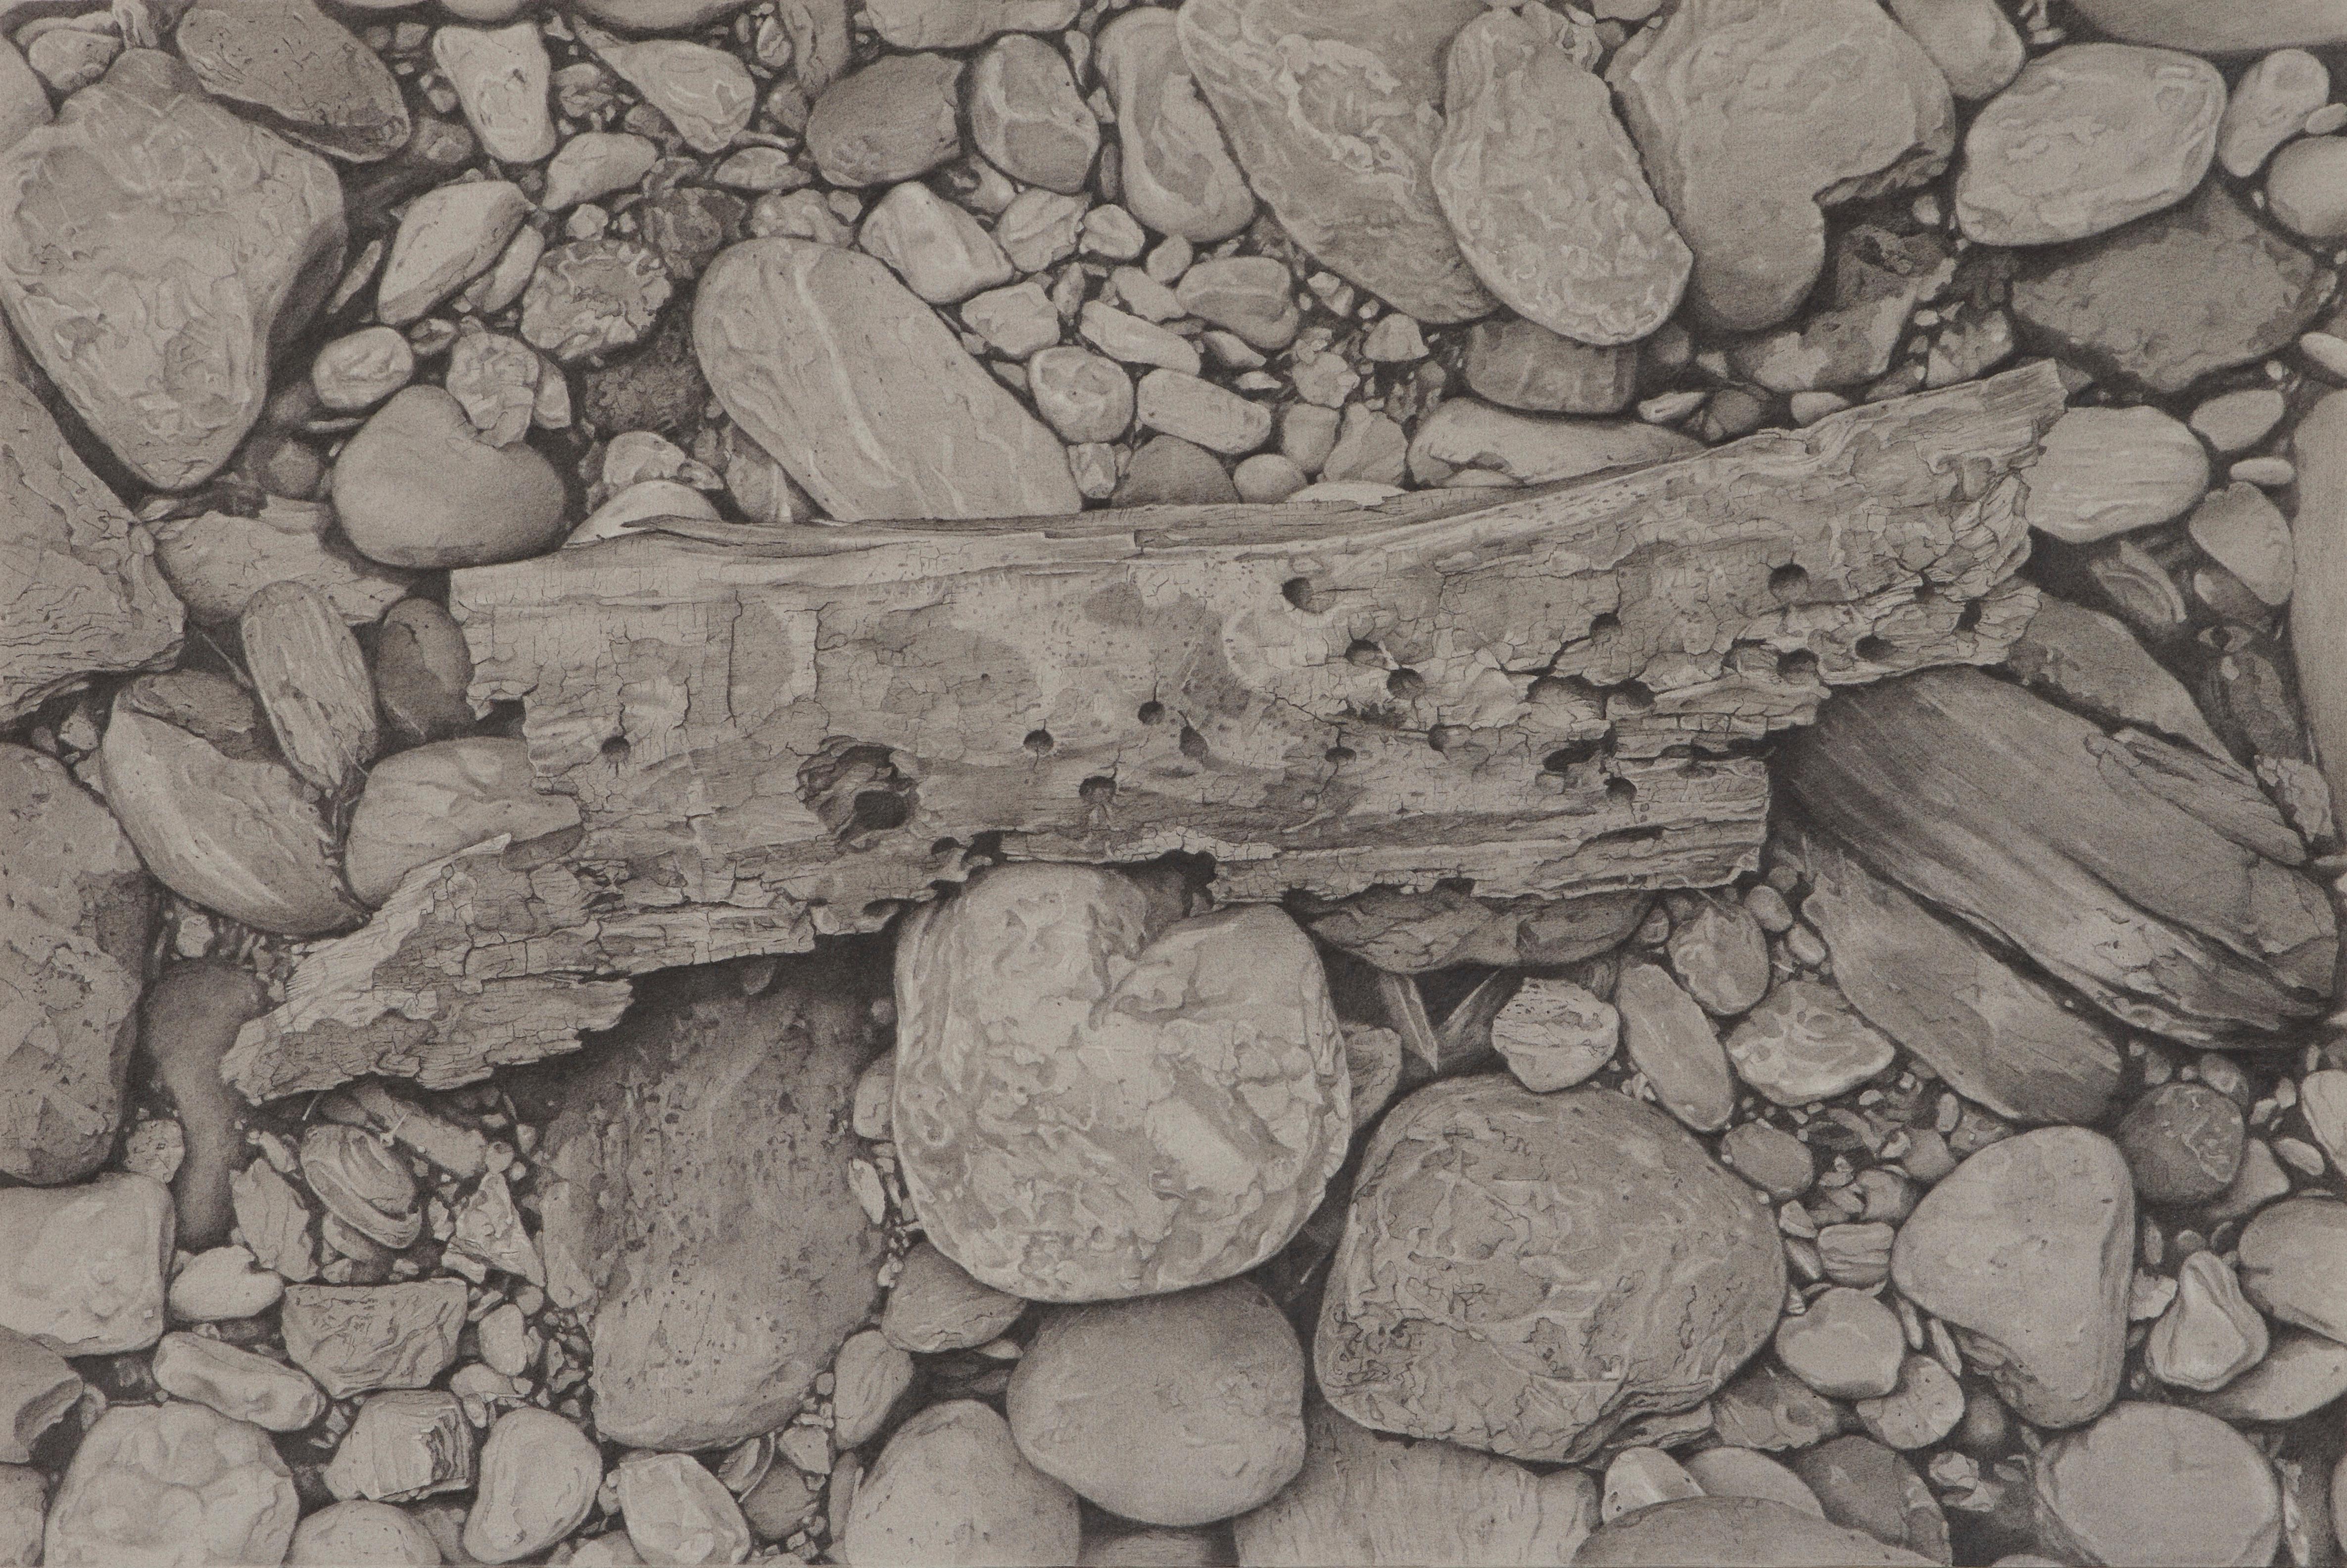 Mary Reilly Landscape Art - Riverbank 2, photorealist graphite nature drawing, 2018